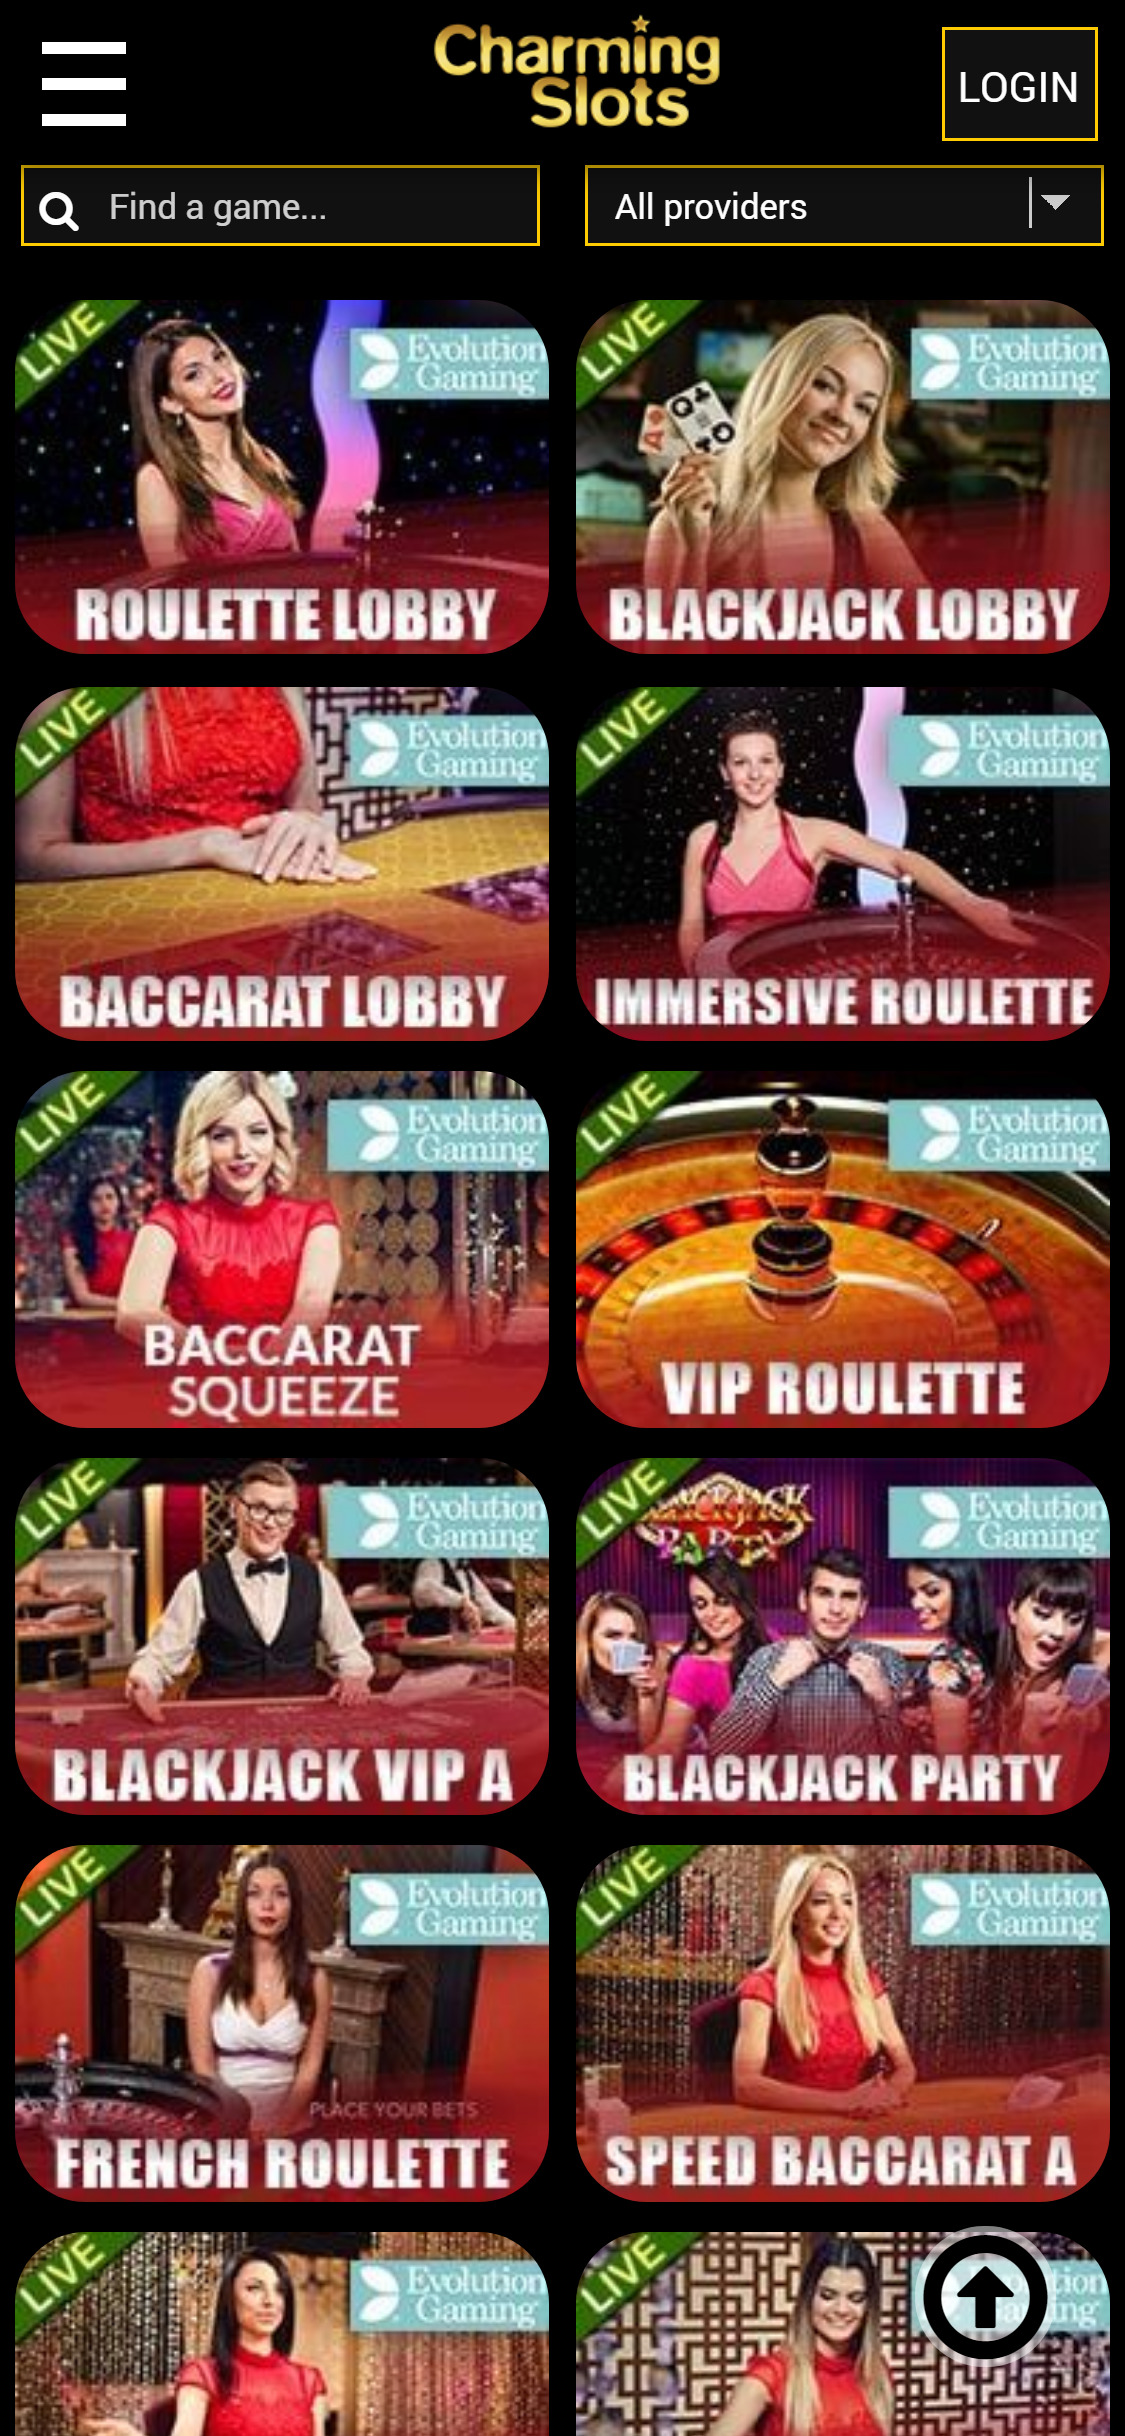 Charming Slots Casino Mobile Live Dealer Games Review